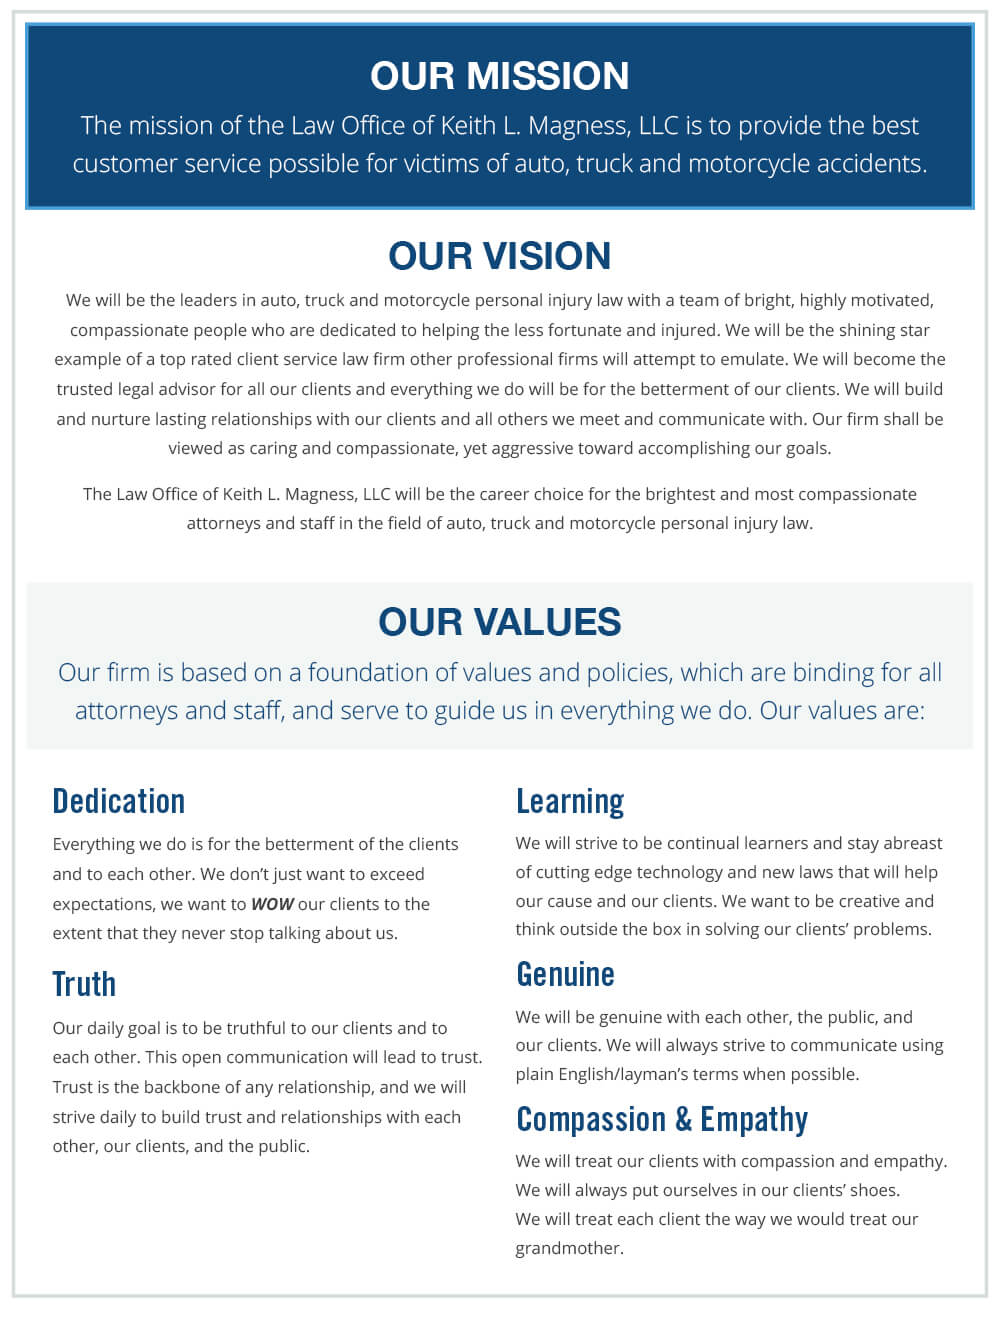 Law Office of Keith L. Magness, LLC Mission, Vision, and Value Statements